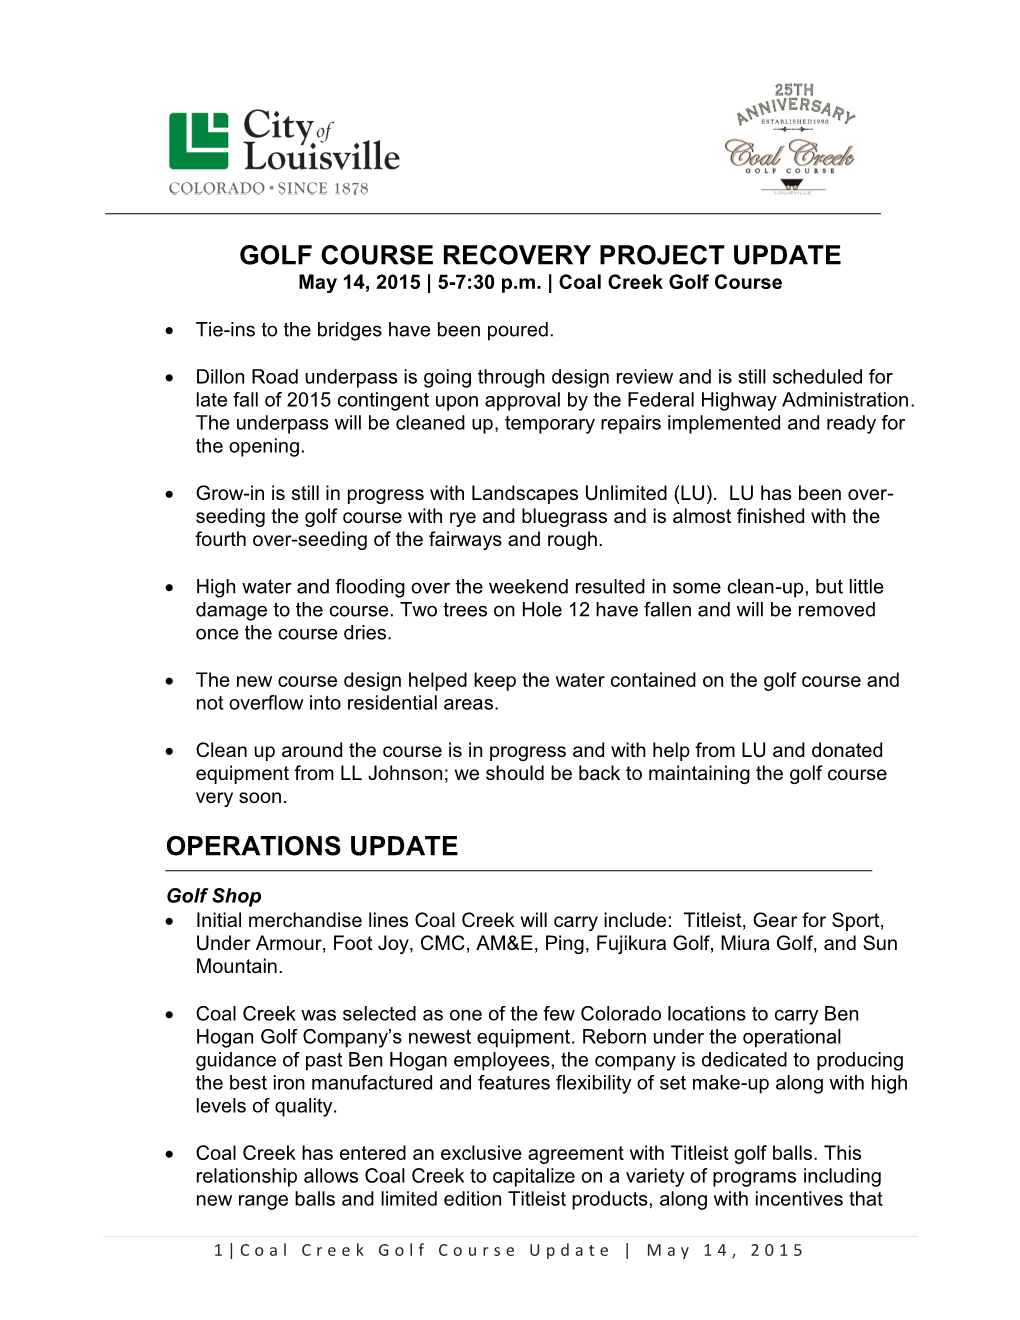 051415 Golf Course Recovery Project Update